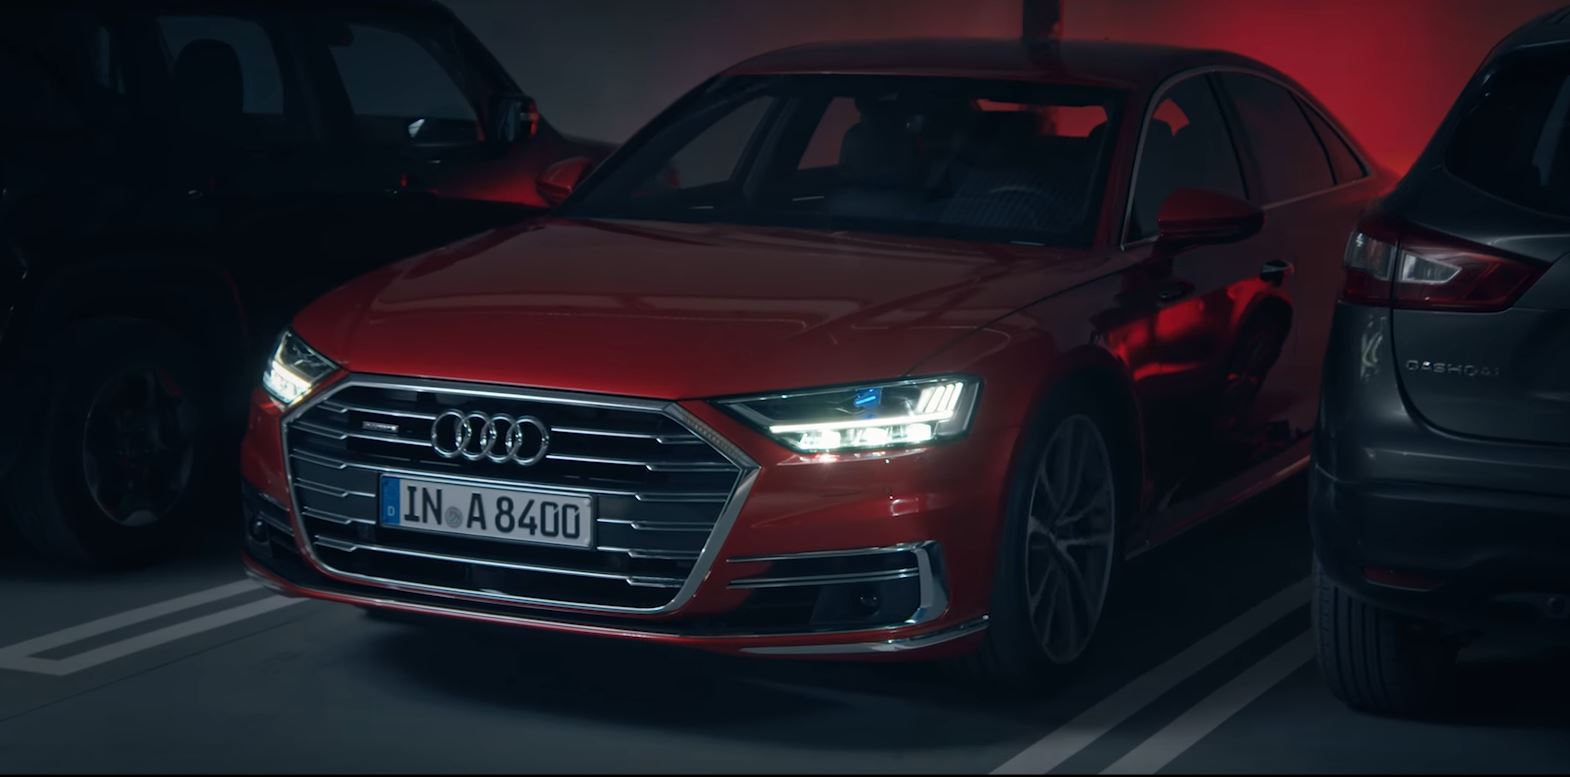 2018-audi-a8-shows-systems-as-little-peo